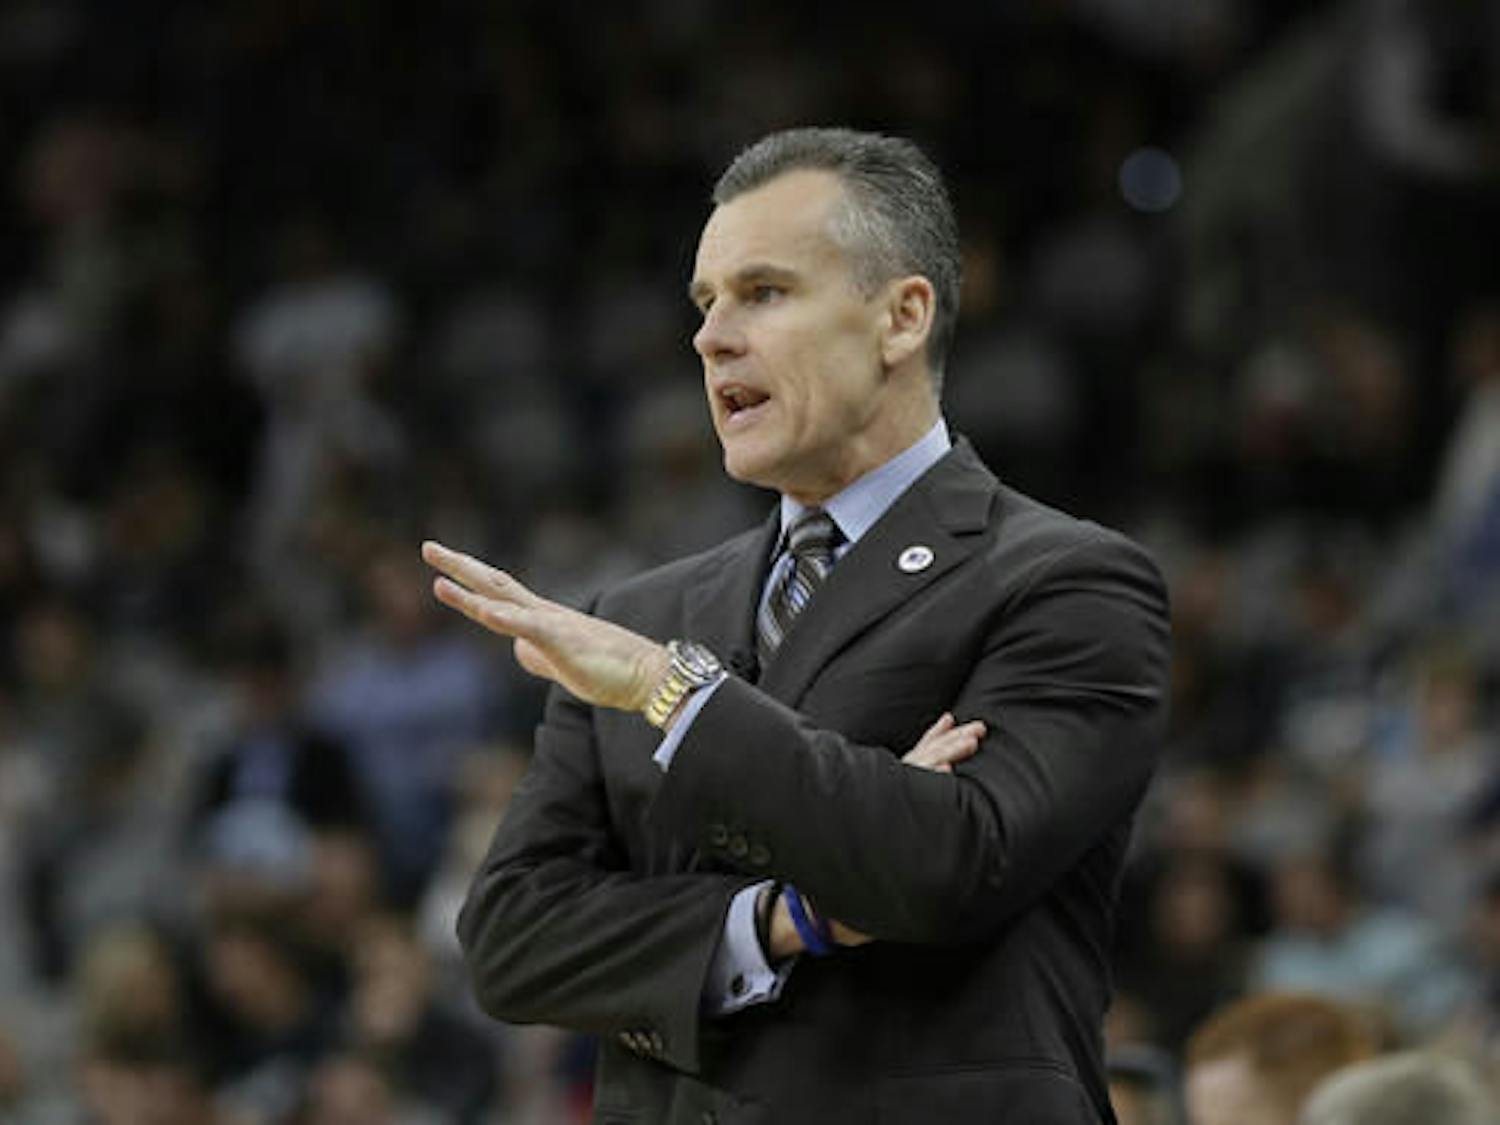 Oklahoma City Thunder head coach Billy Donovan talks to his players during the first half of an NBA basketball game against the San Antonio Spurs, Tuesday, April 12, 2016, in San Antonio. (AP Photo/Eric Gay)